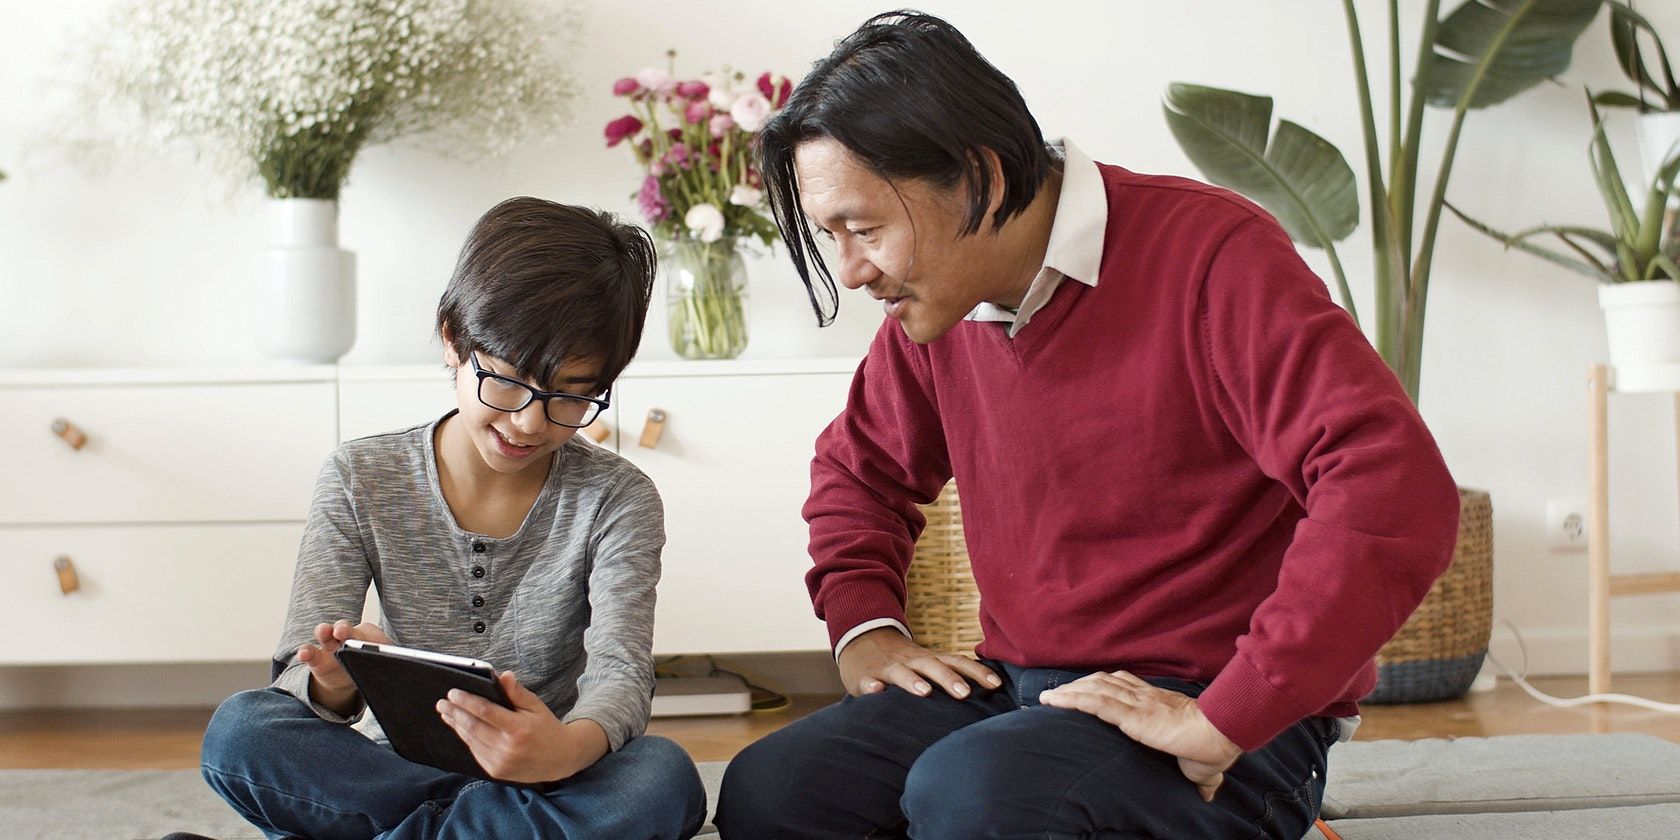 Kid Holding Tablet With Man Sitting Next to Him